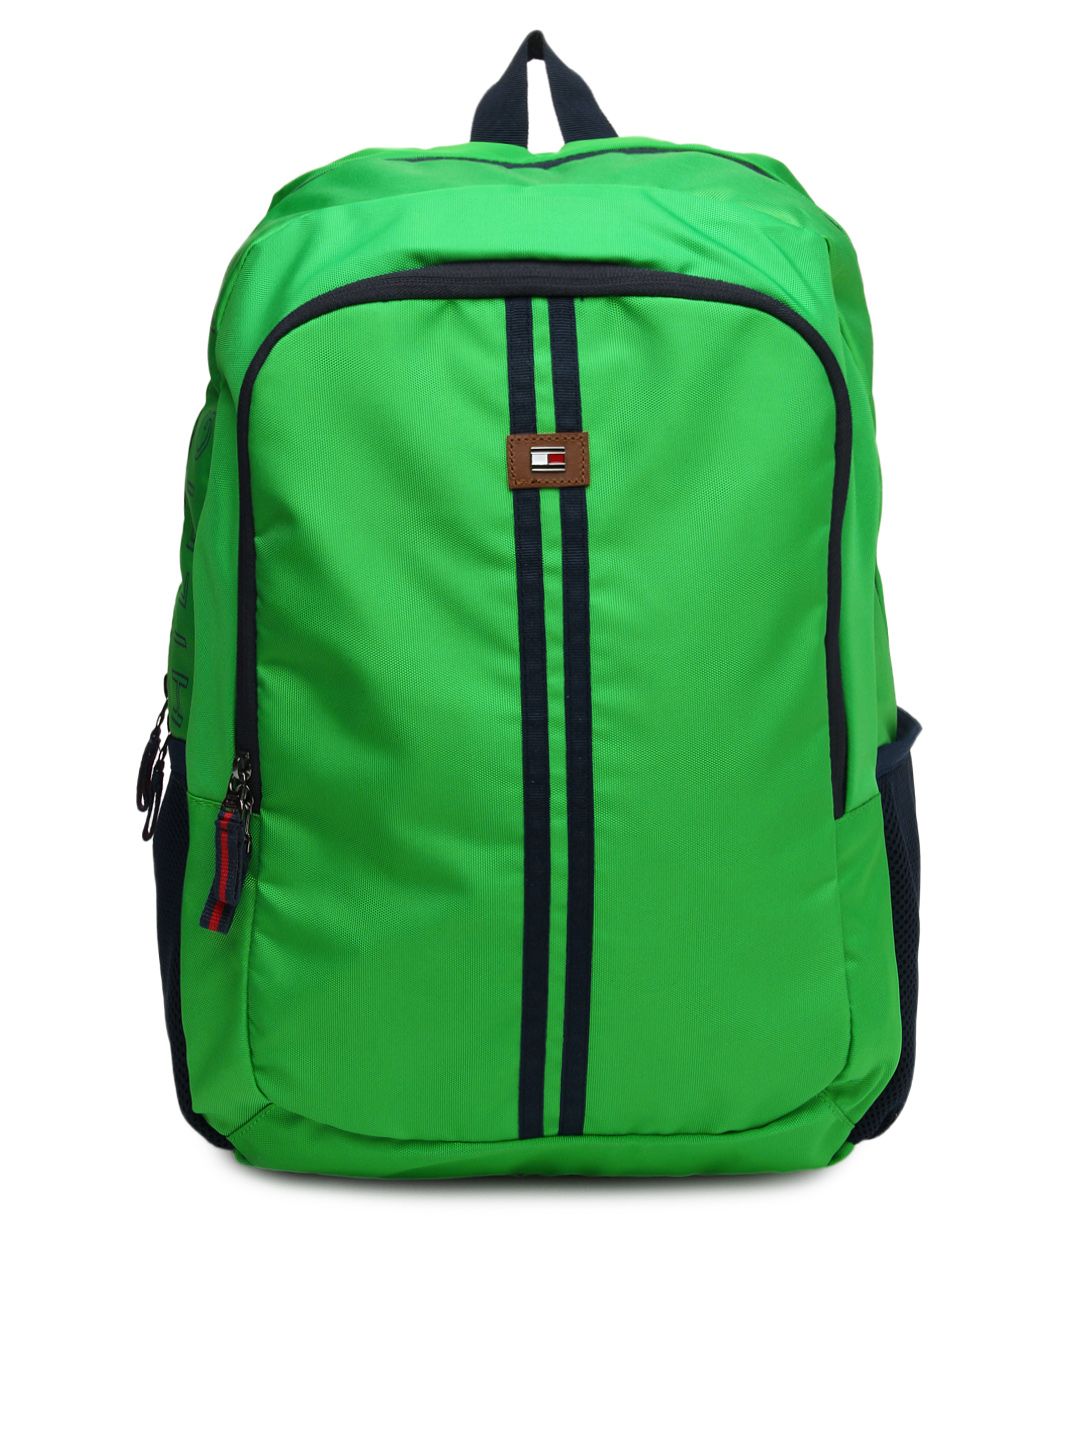 Tommy Hilfiger Unisex Green & Navy Backpack Price in India